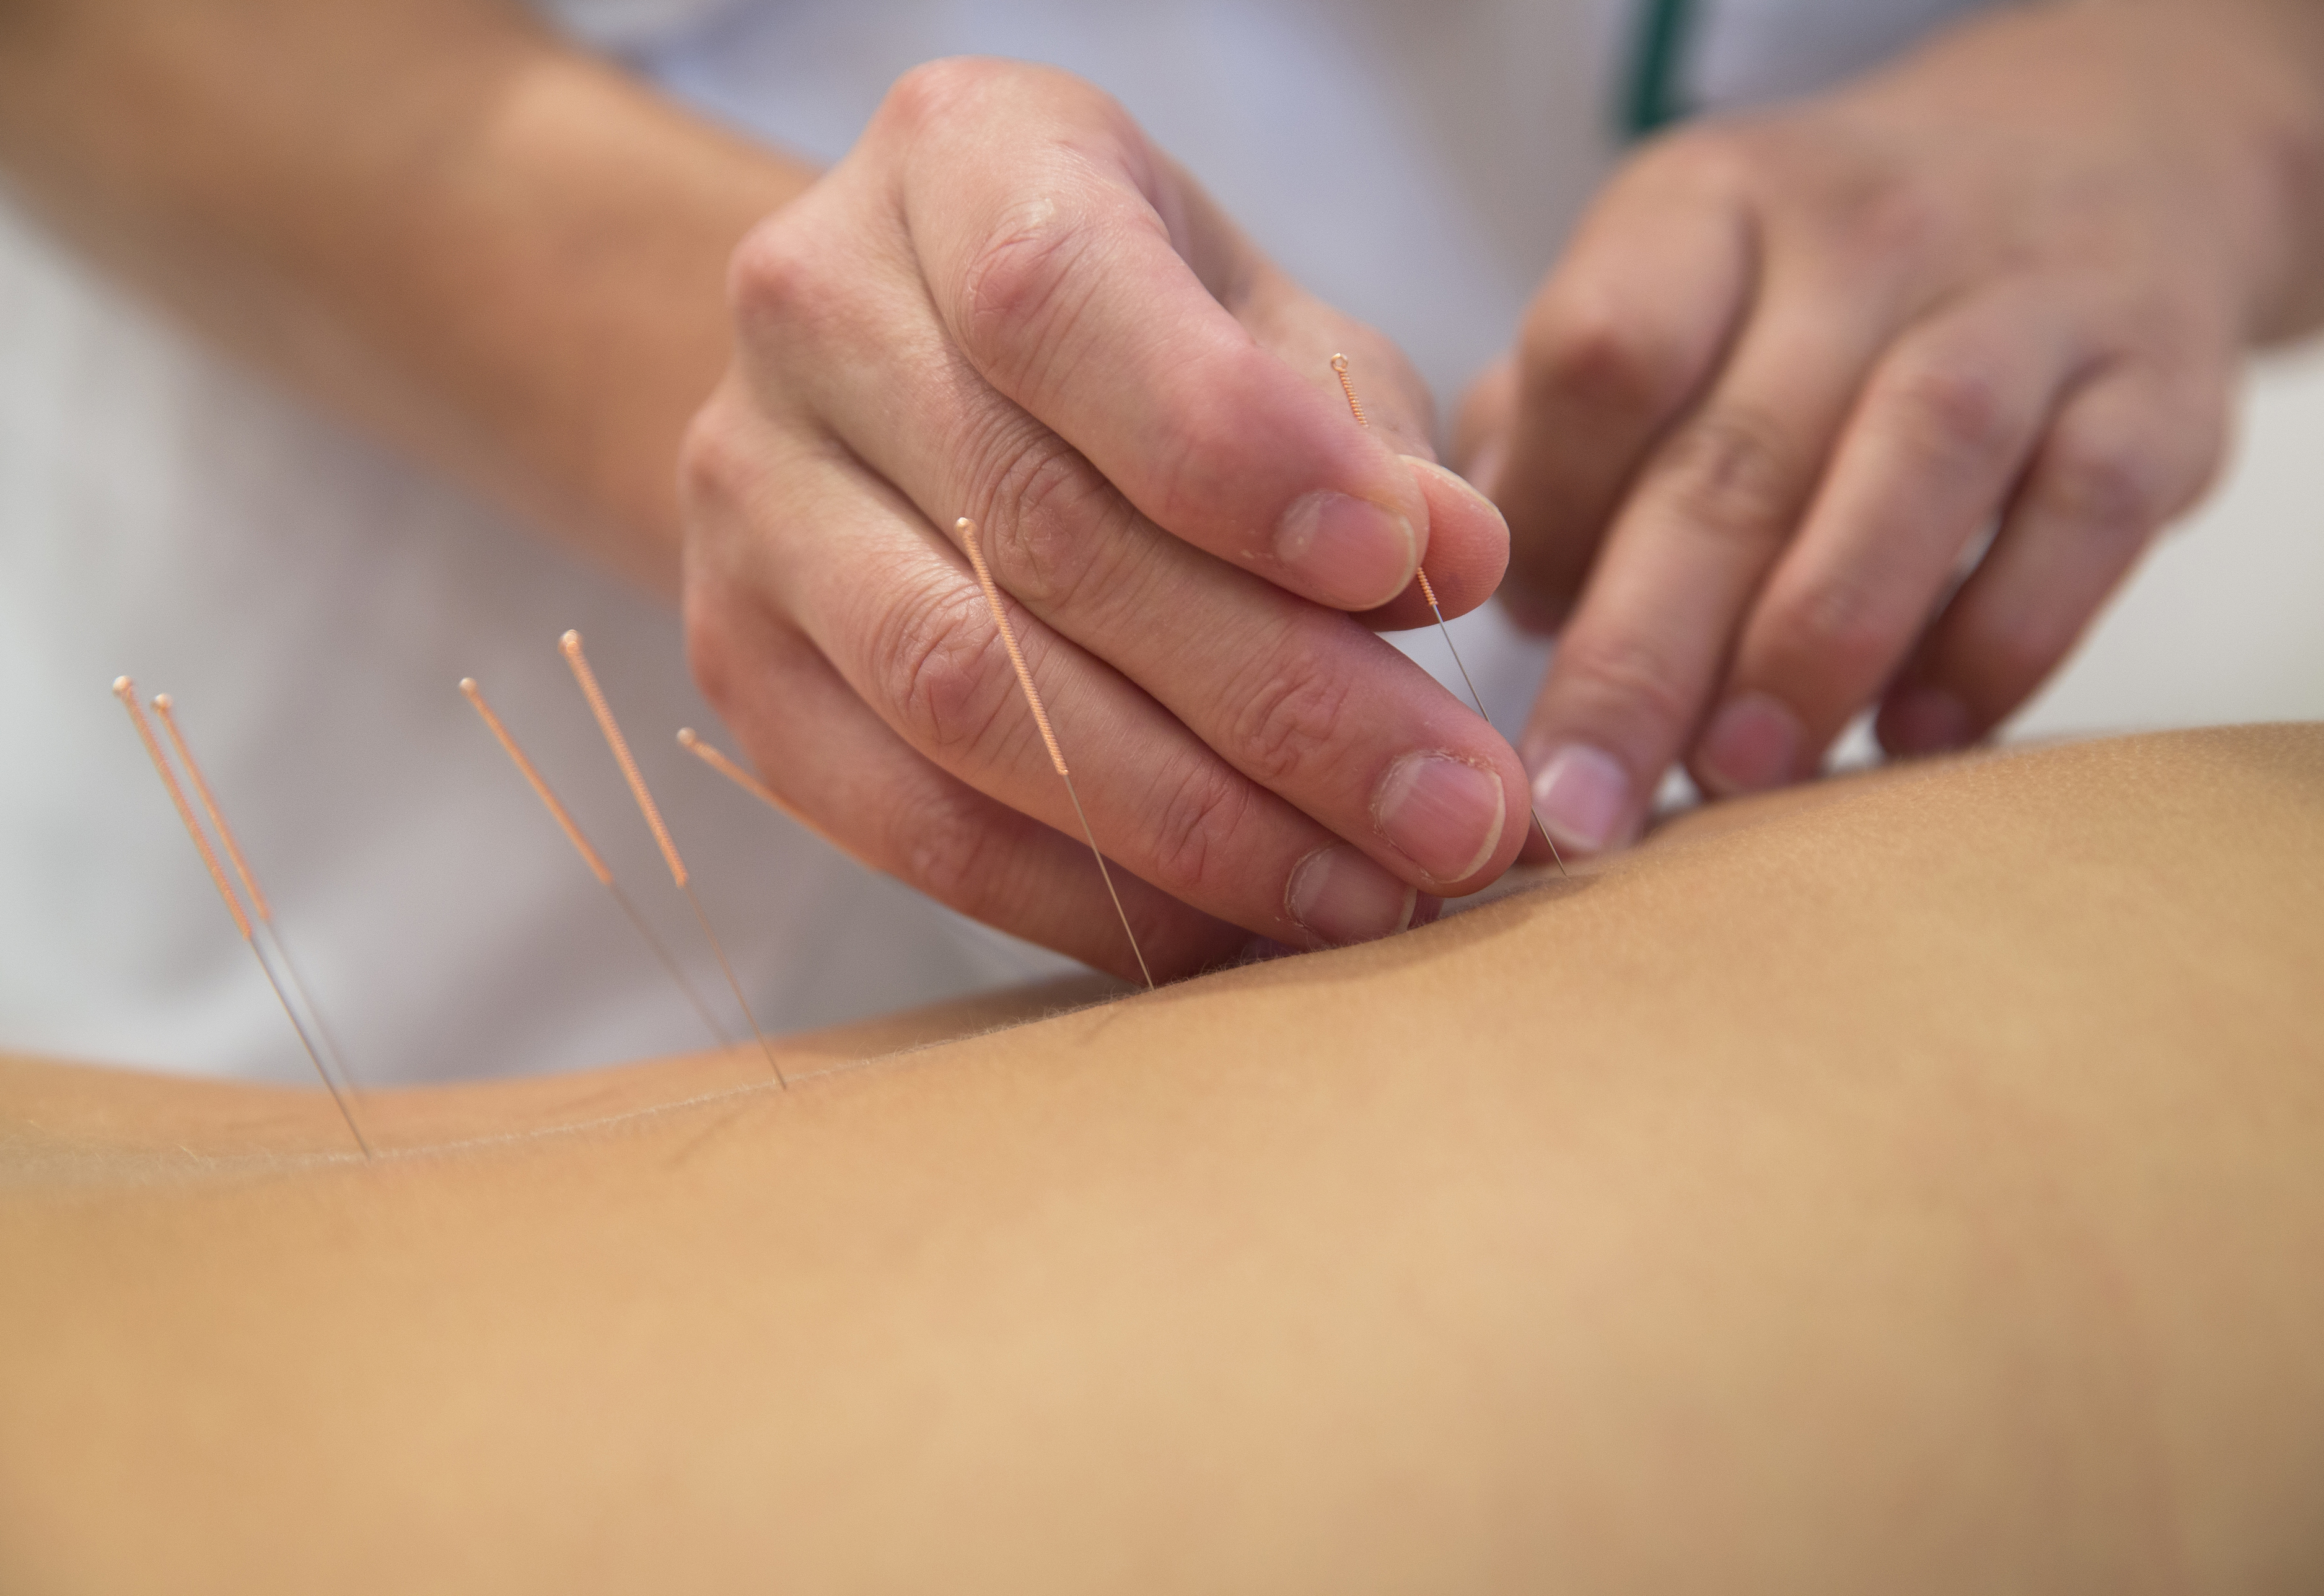 Acupuncture The Science Behind It - 